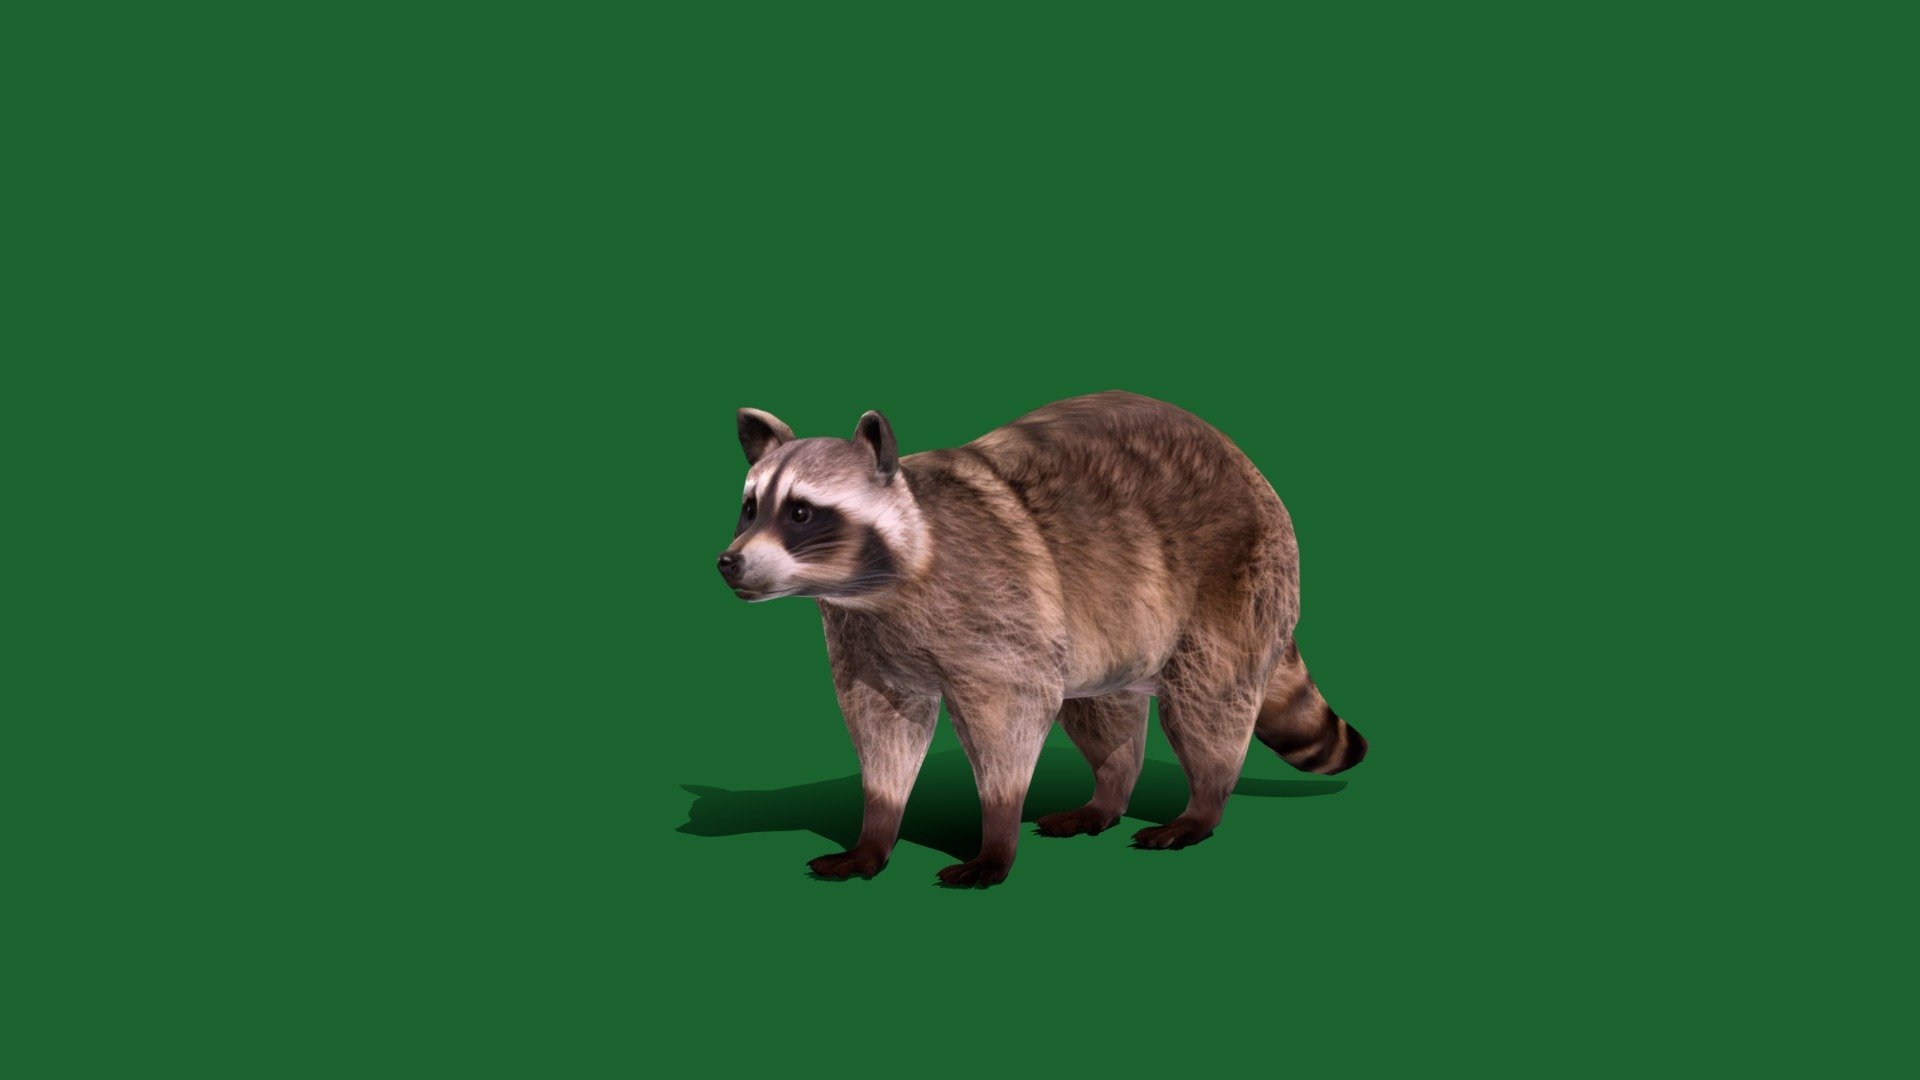 Common Raccoon (North America)Cute,Pet,Largest procyonid

Procyon lotor Animal Mammal (spelled racoon)omnivorous

1 Draw Calls

LowPoly

Game Ready (Character)

Subdivision Surface Ready

12- Animations 

4K PBR Textures 2 Material

Unreal/Unity FBX 

Blend File 3.6.5 LTS / 4

USDZ File (AR Ready). Real Scale Dimension (Xcode ,Reality Composer, Keynote Ready)

Textures Files

GLB File (Unreal 5.1 Plus Native Support)


Gltf File ( Spark AR, Lens Studio(SnapChat) , Effector(Tiktok) , Spline, Play Canvas,Omiverse ) Compatible**




Triangles -8392



Faces -4228

Edges -8441

Vertices -4218

Diffuse, Metallic, Roughness , Normal Map ,Specular Map,AO


The raccoon, also spelled racoon and sometimes called the common raccoon to distinguish it from the other species, is a mammal native to North America. It is the largest of the procyonid family, having a body length of 40 to 70 cm, and a body weight of 5 to 26 kg 3d model